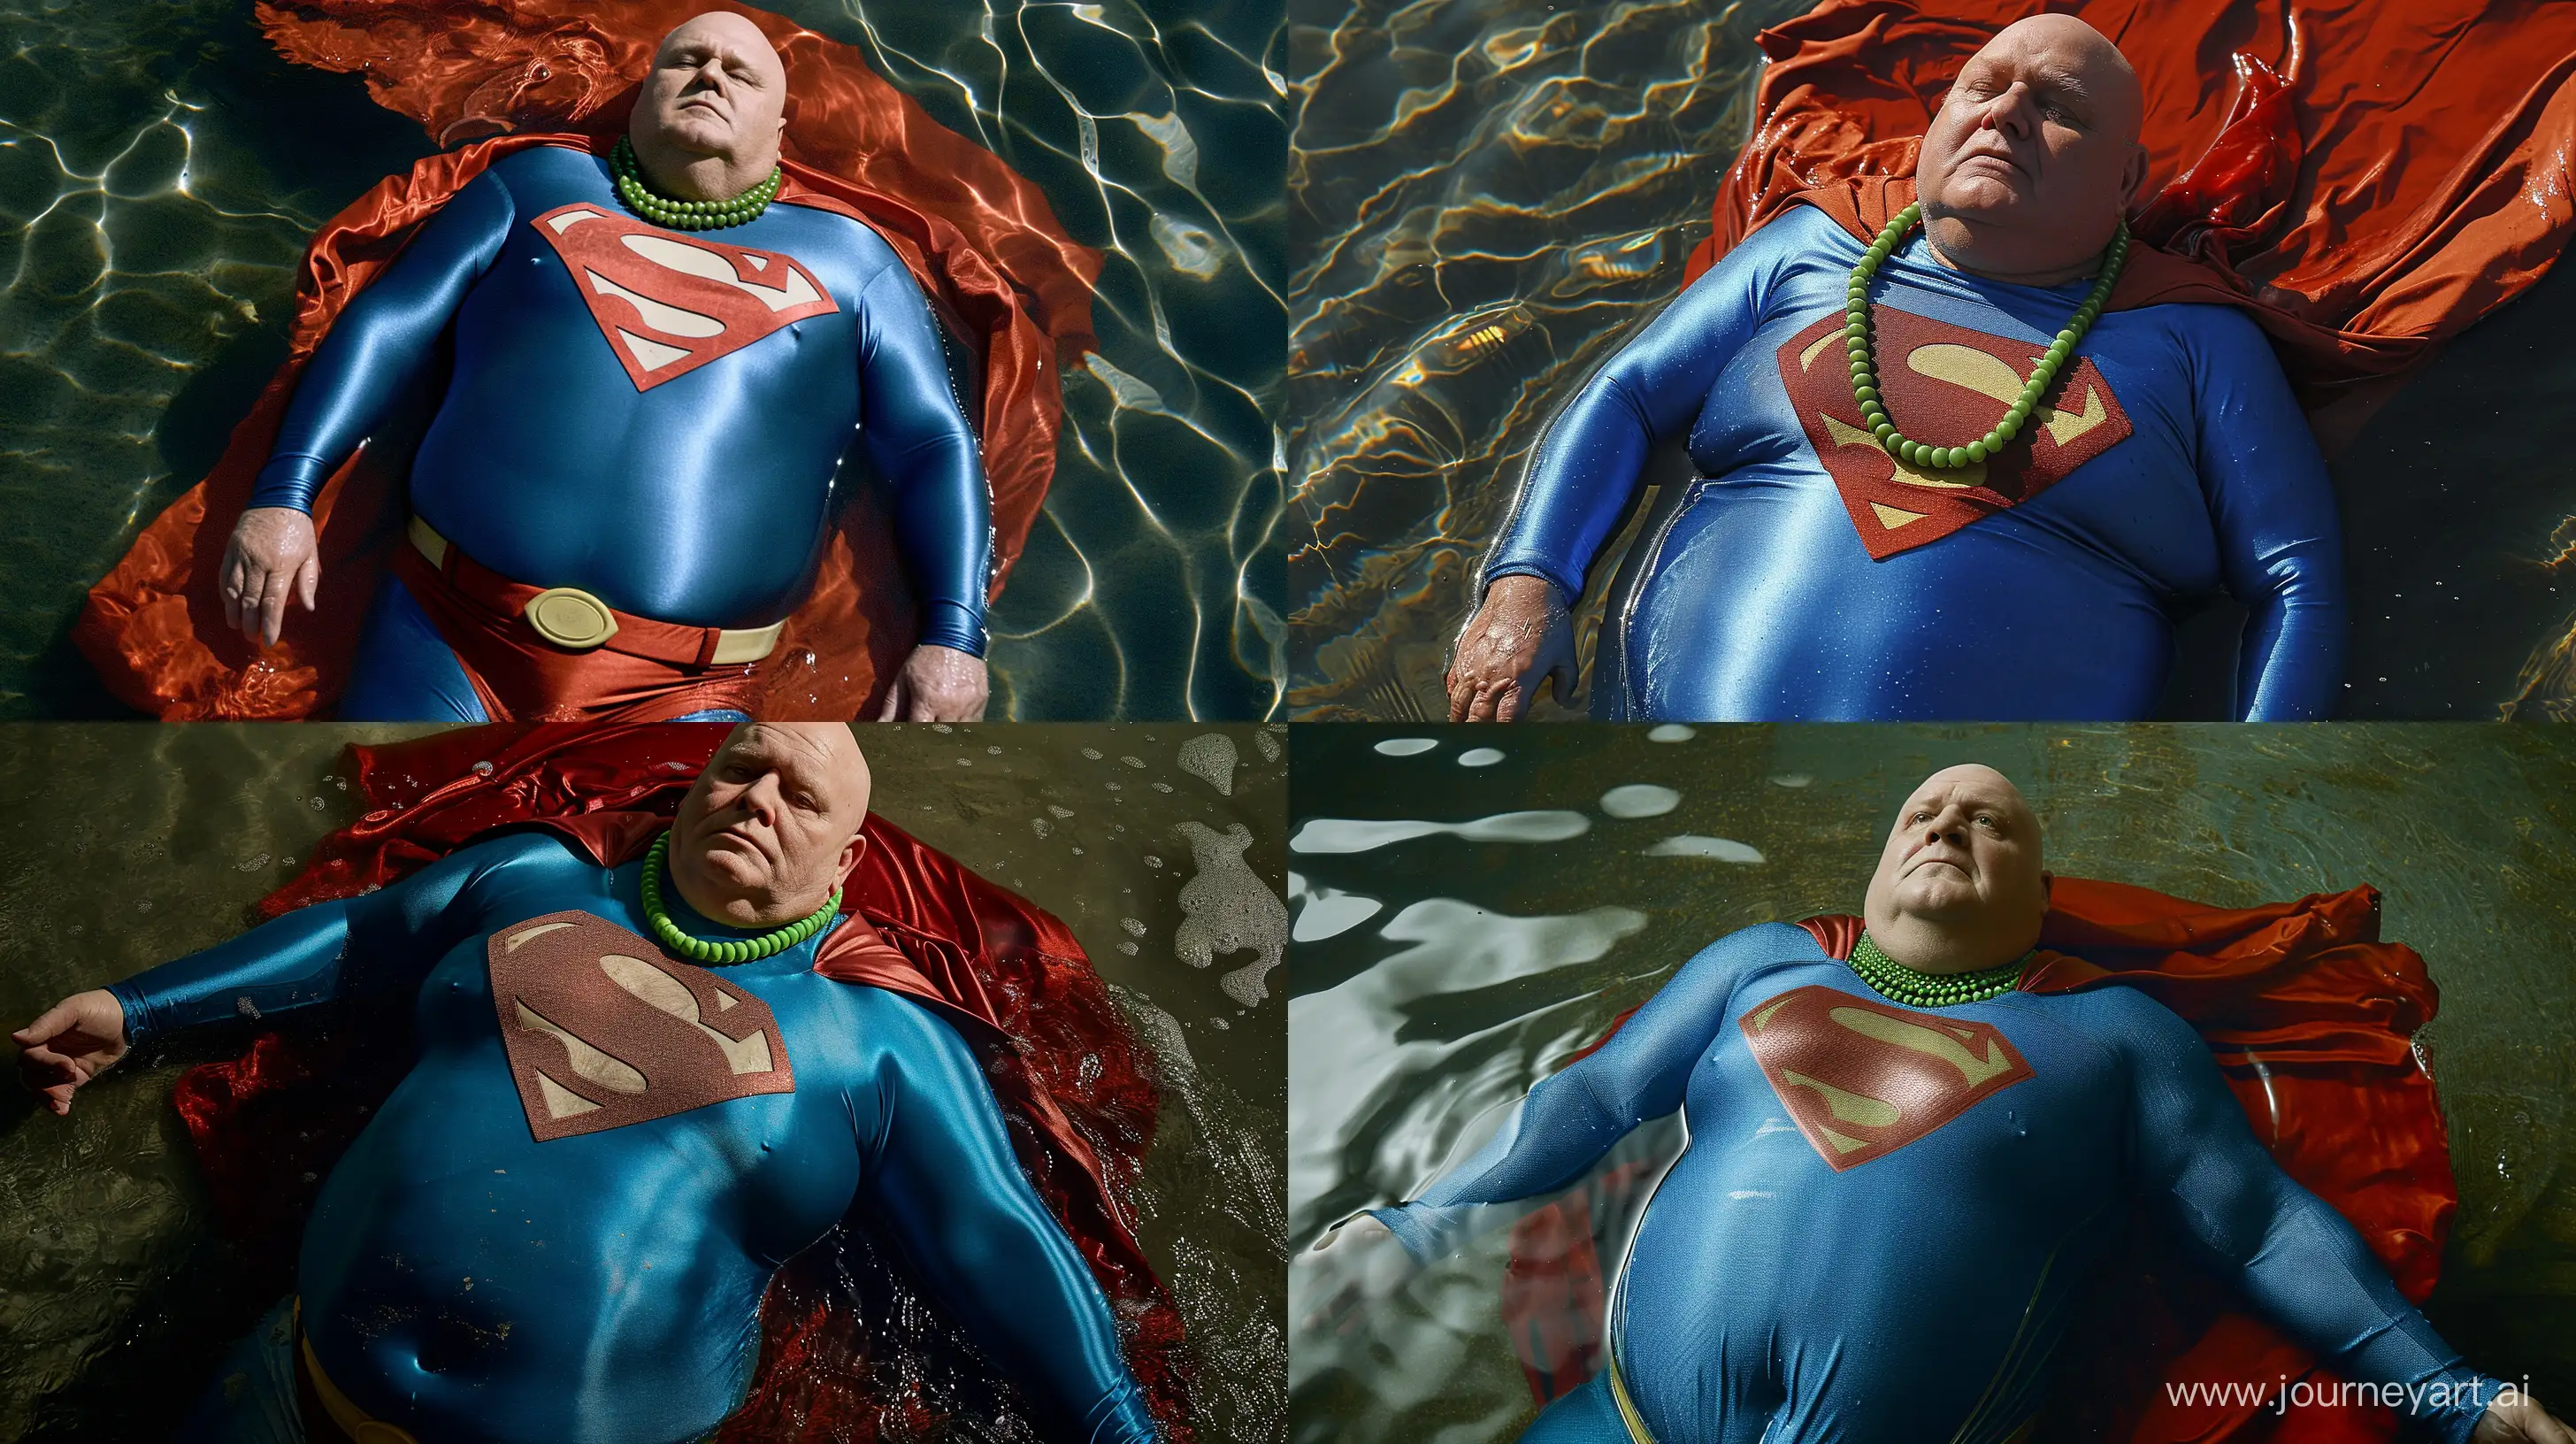 Elderly-Superman-Relaxing-in-Water-with-Vibrant-Costume-and-Accessories